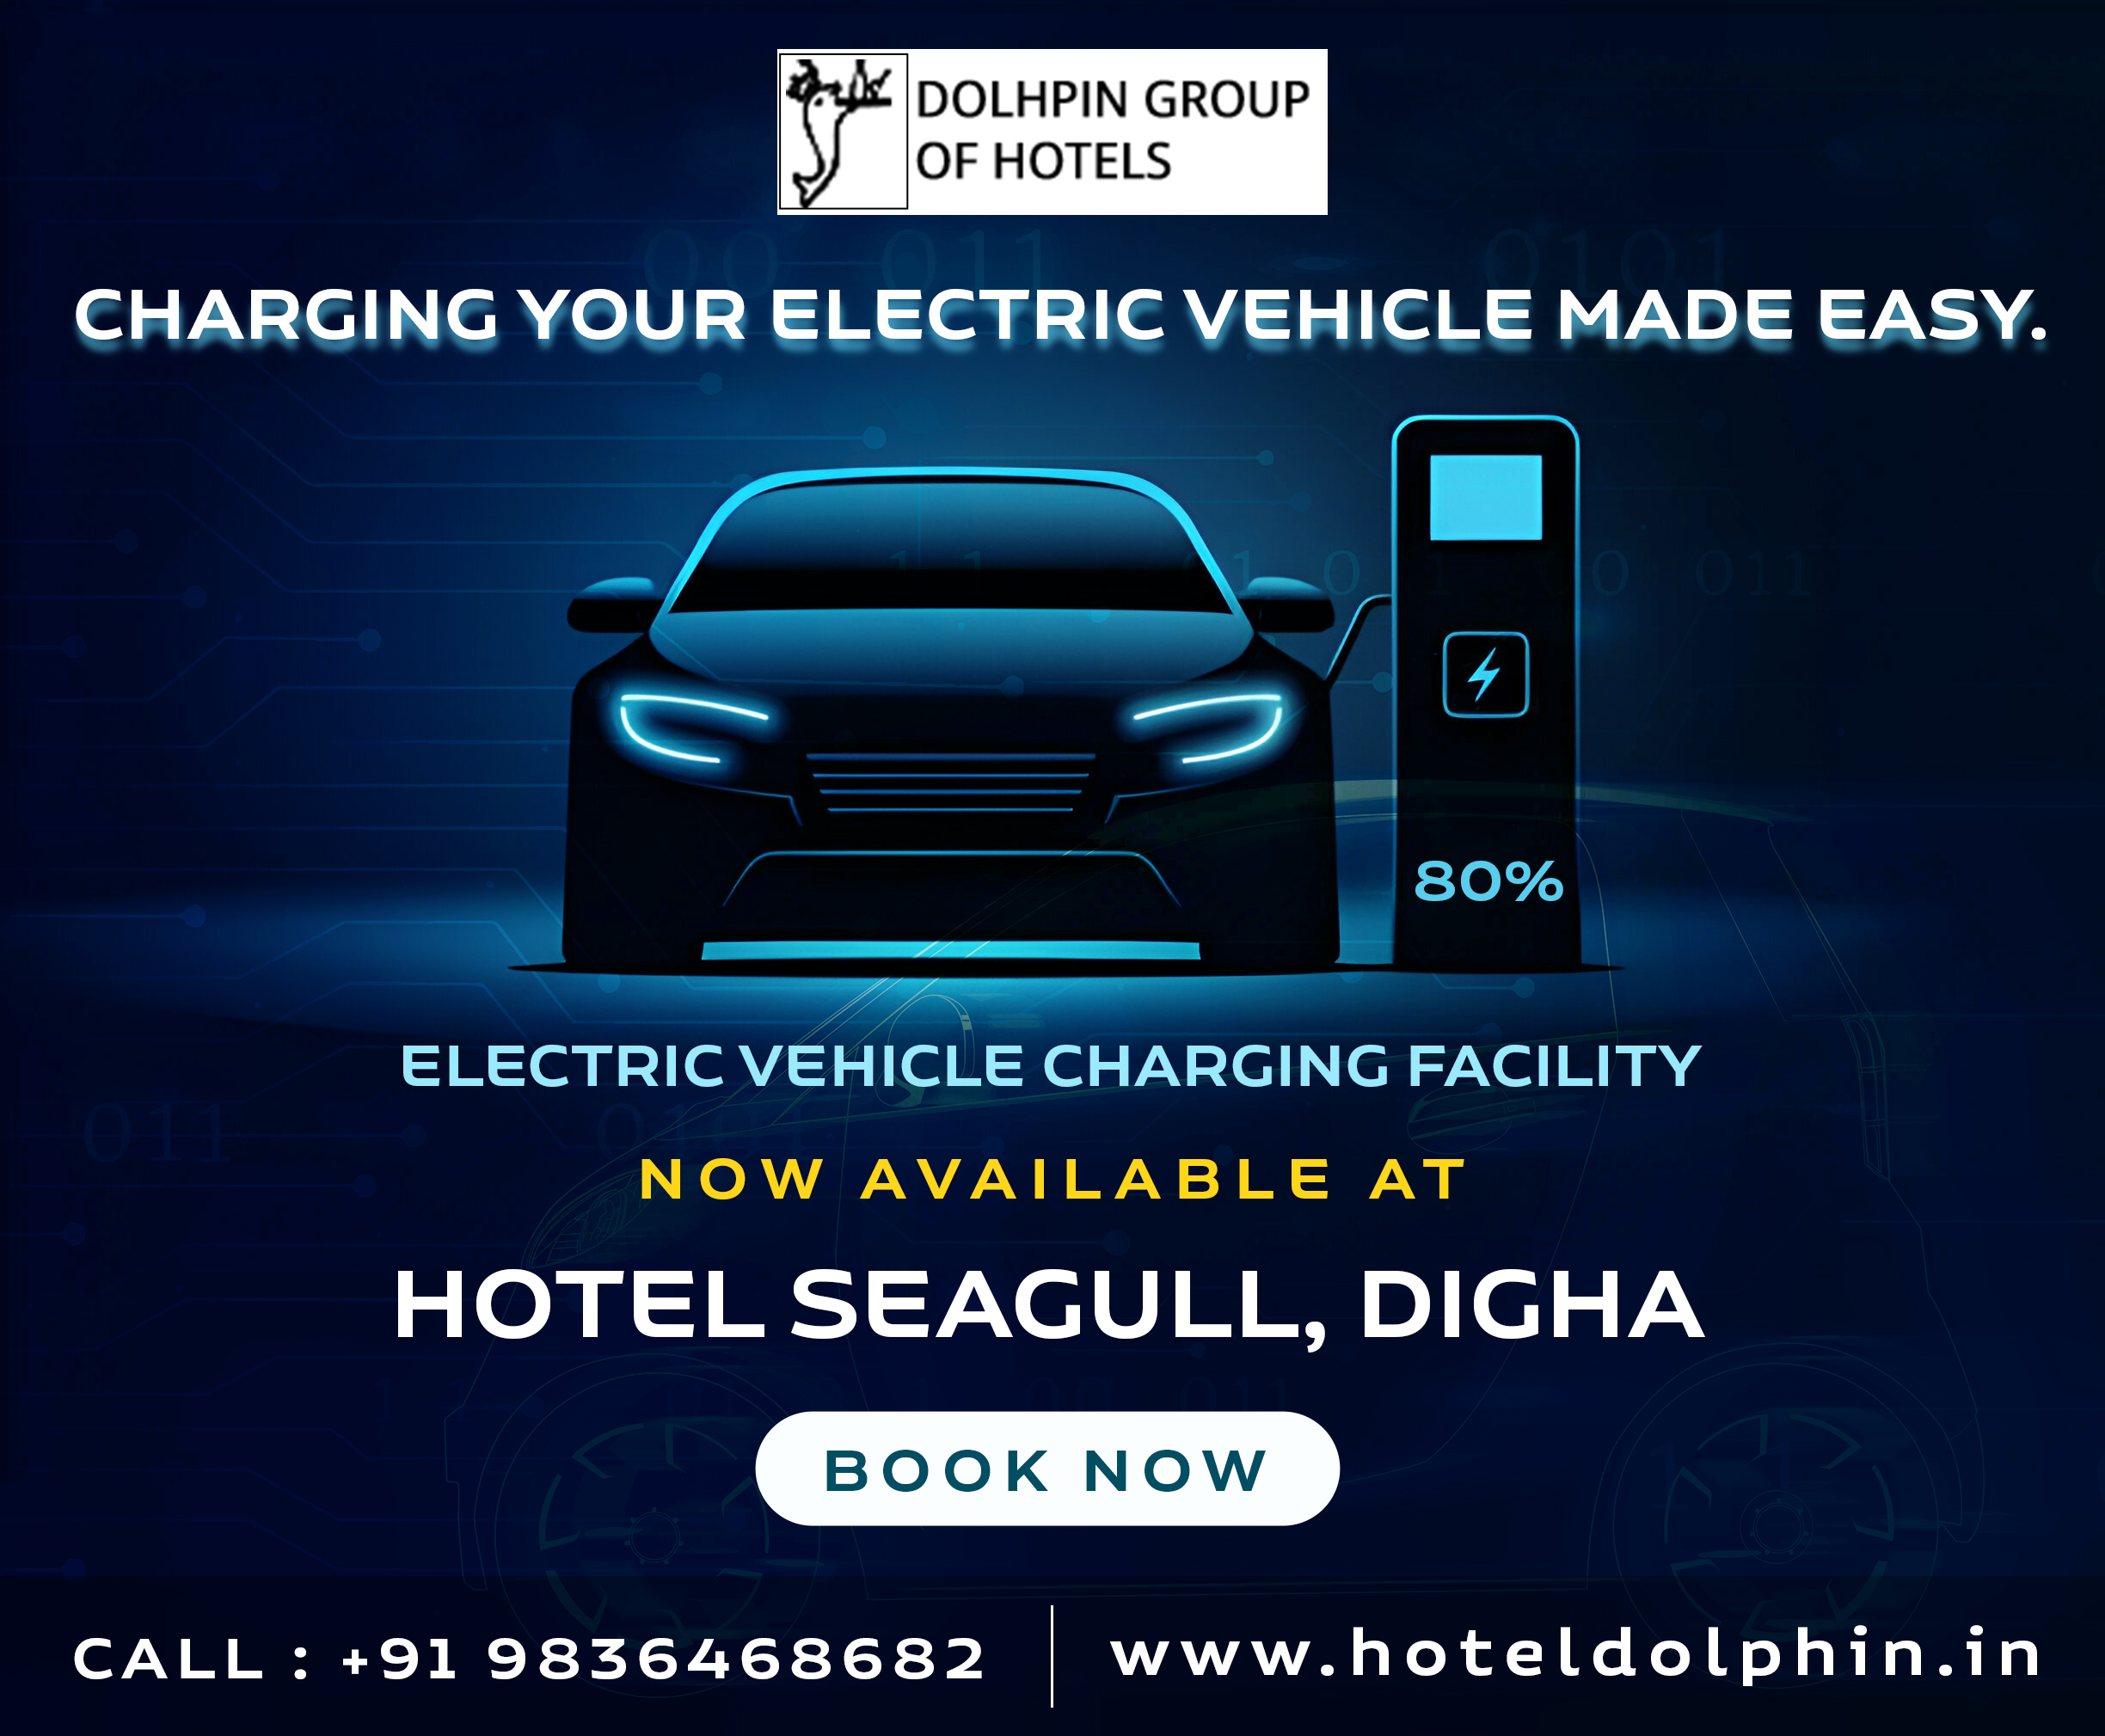 Electric Vehicle charging facility available at Hotel Seagull Digha